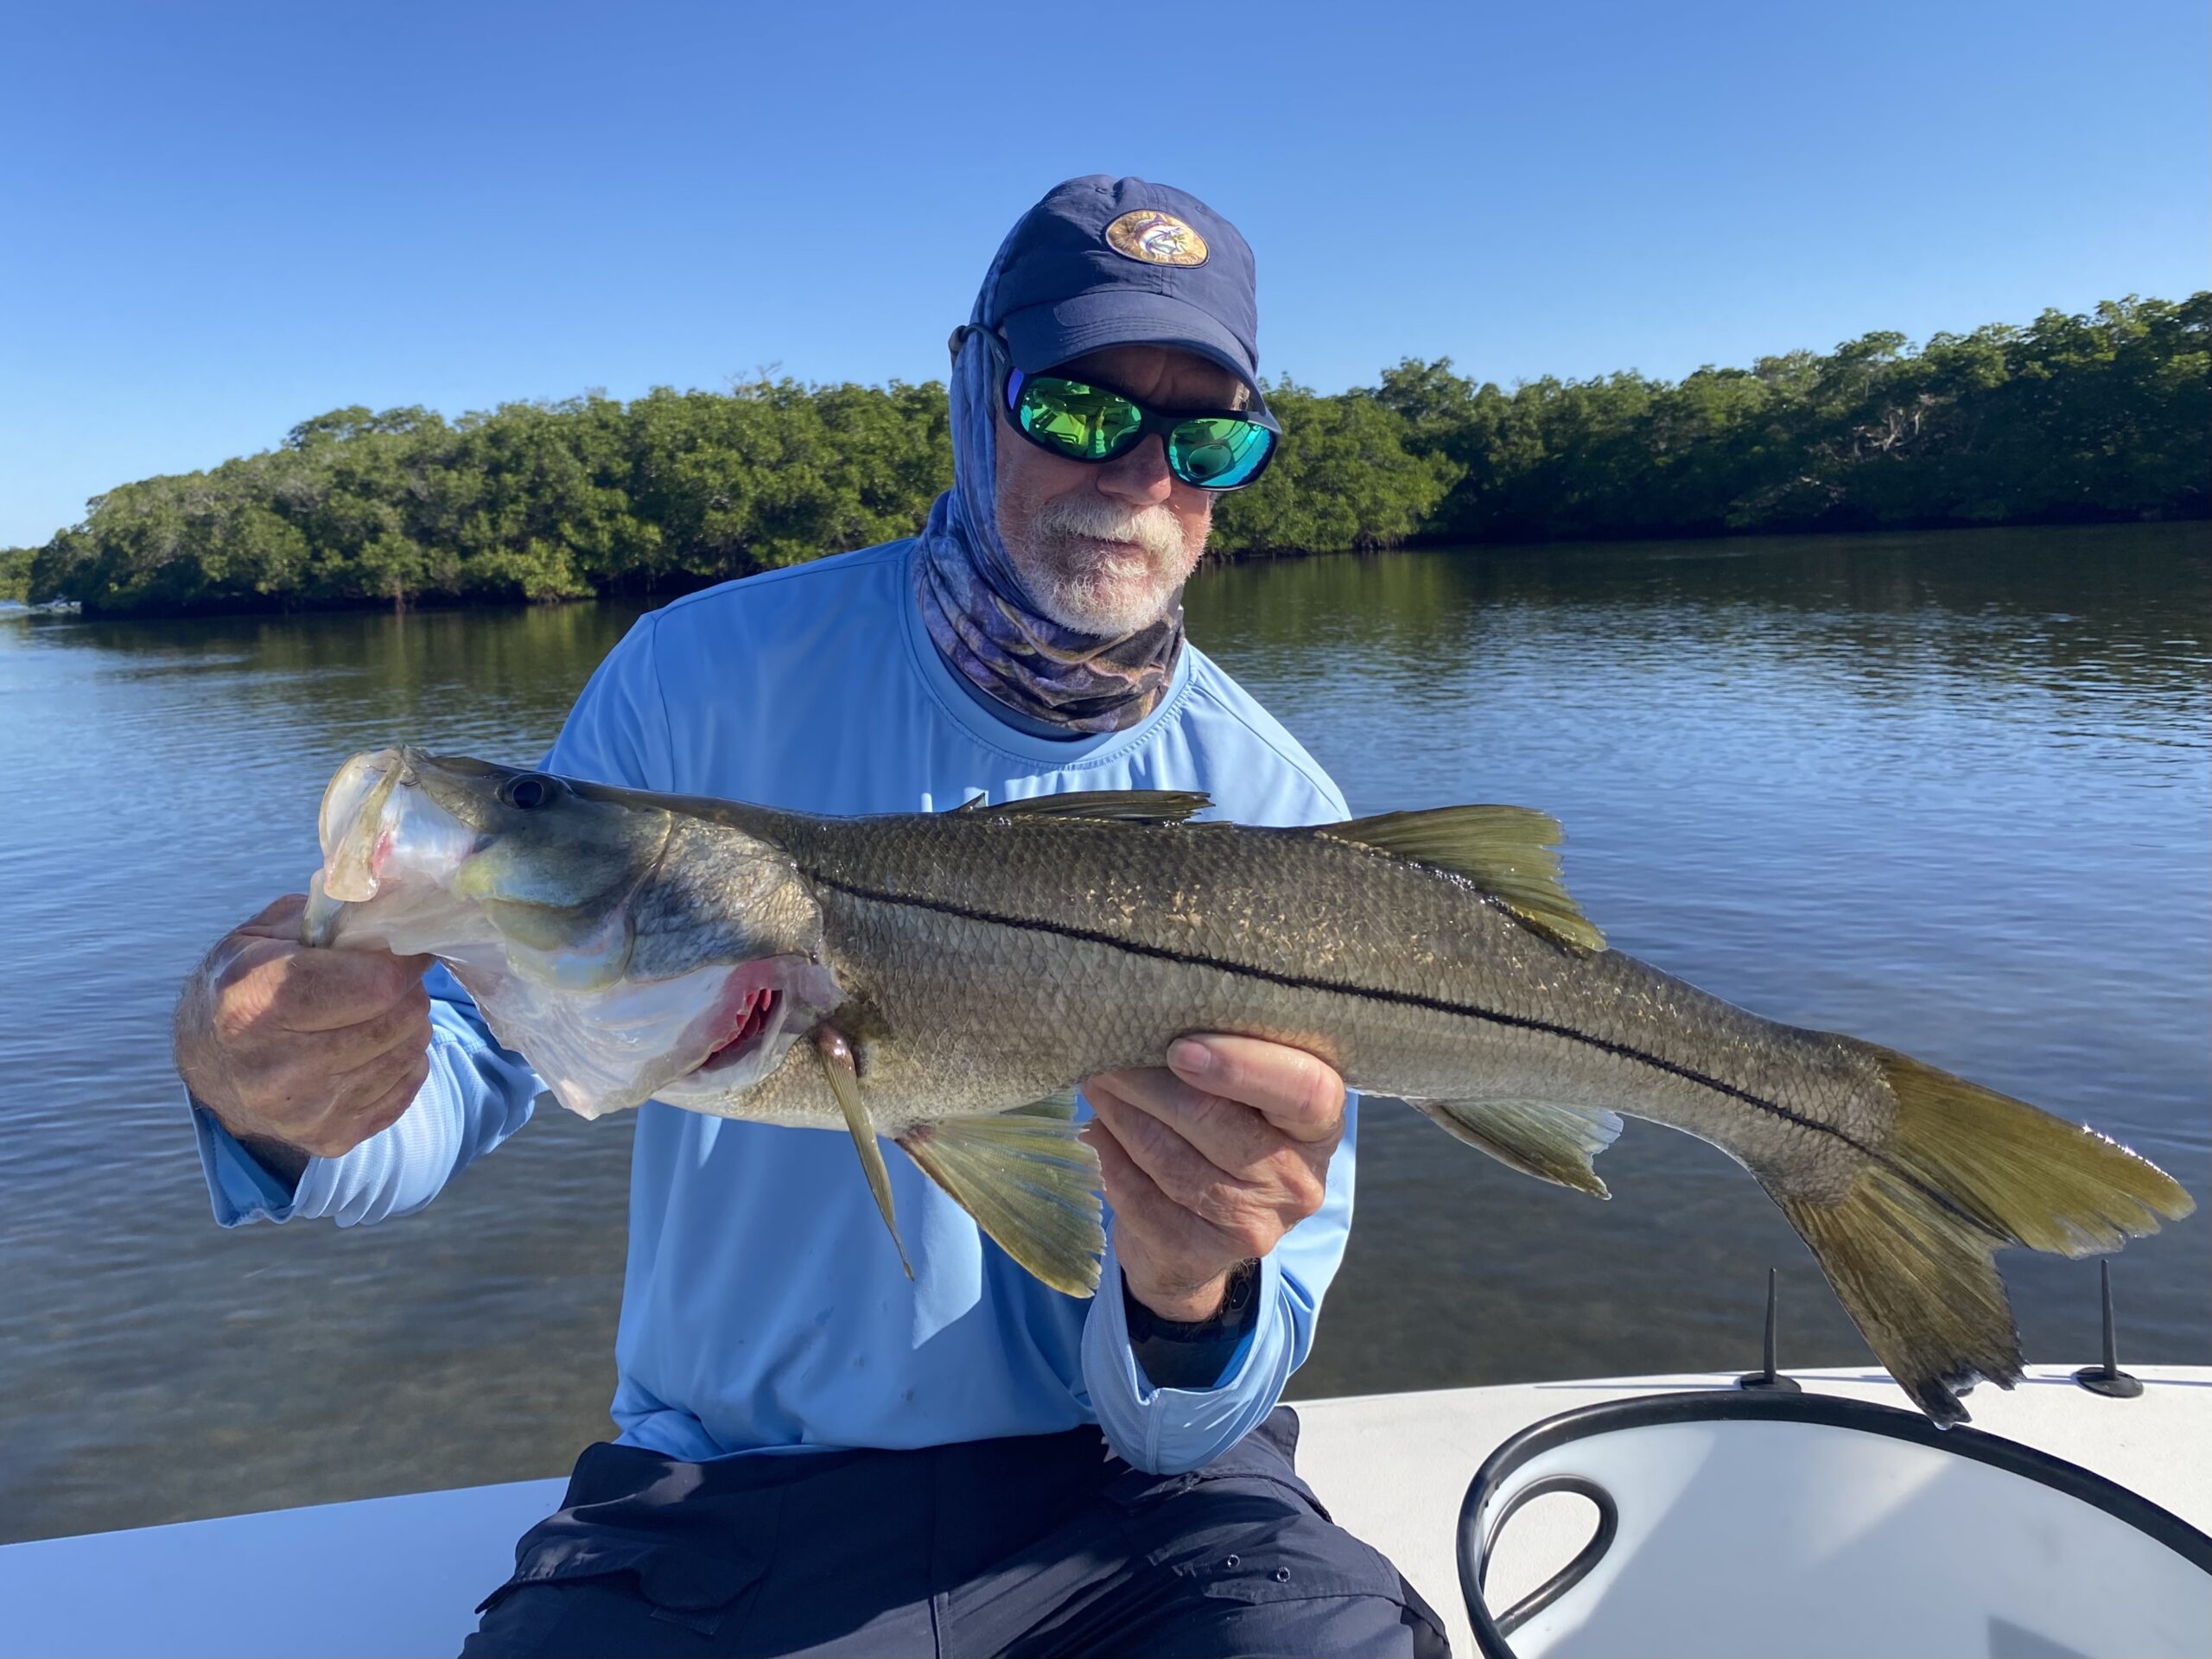 An angler holds a nice snook that he caught while fishing